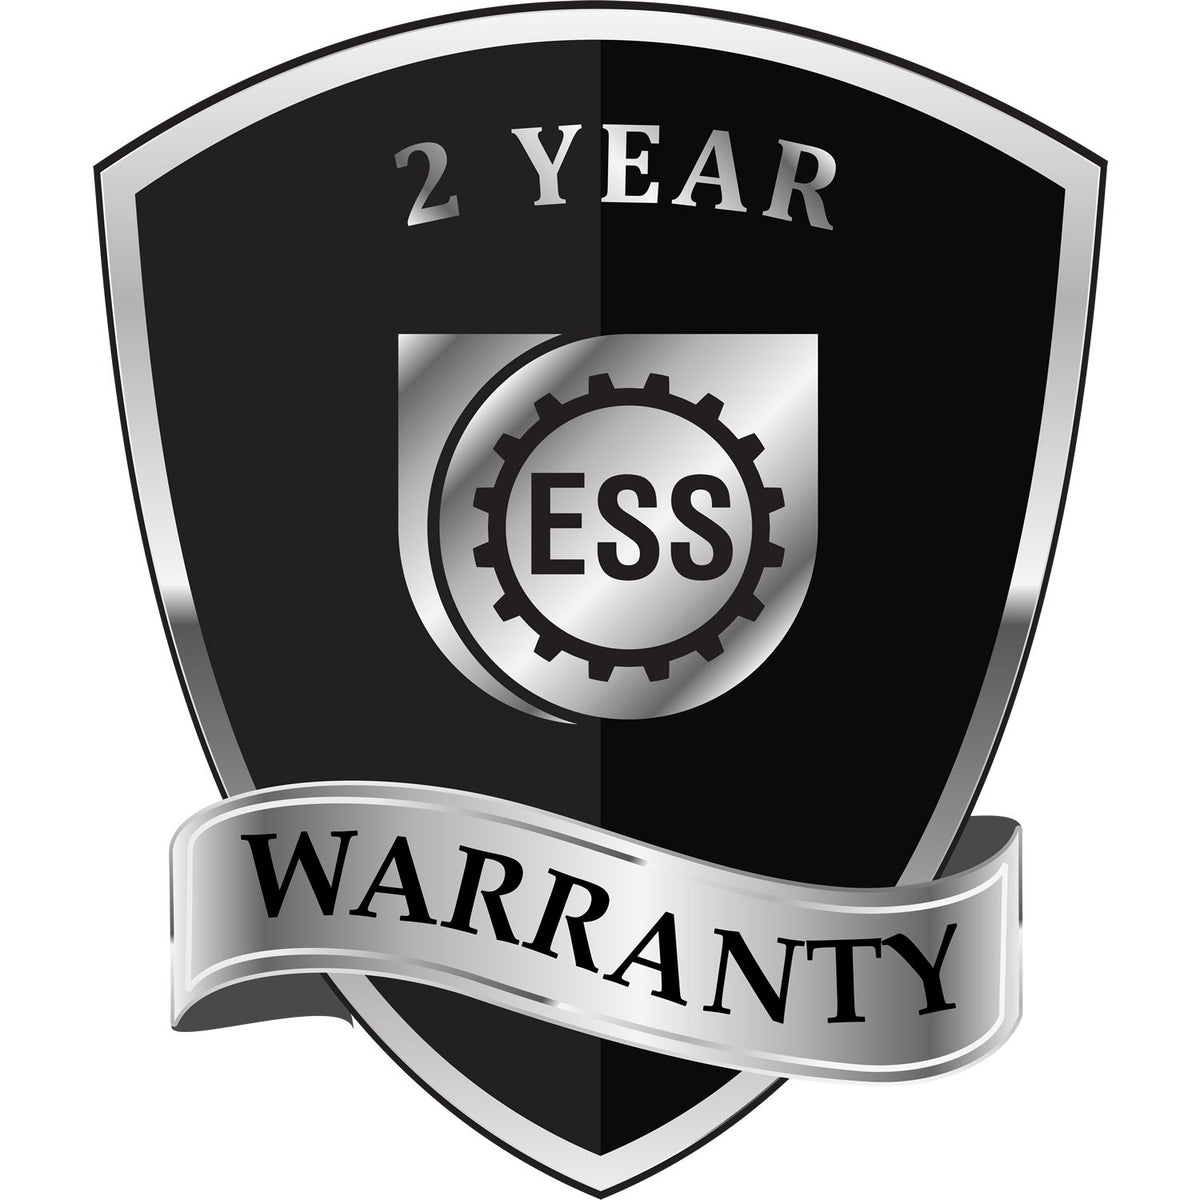 A black and silver badge or emblem showing warranty information for the Soft Kansas Professional Geologist Seal